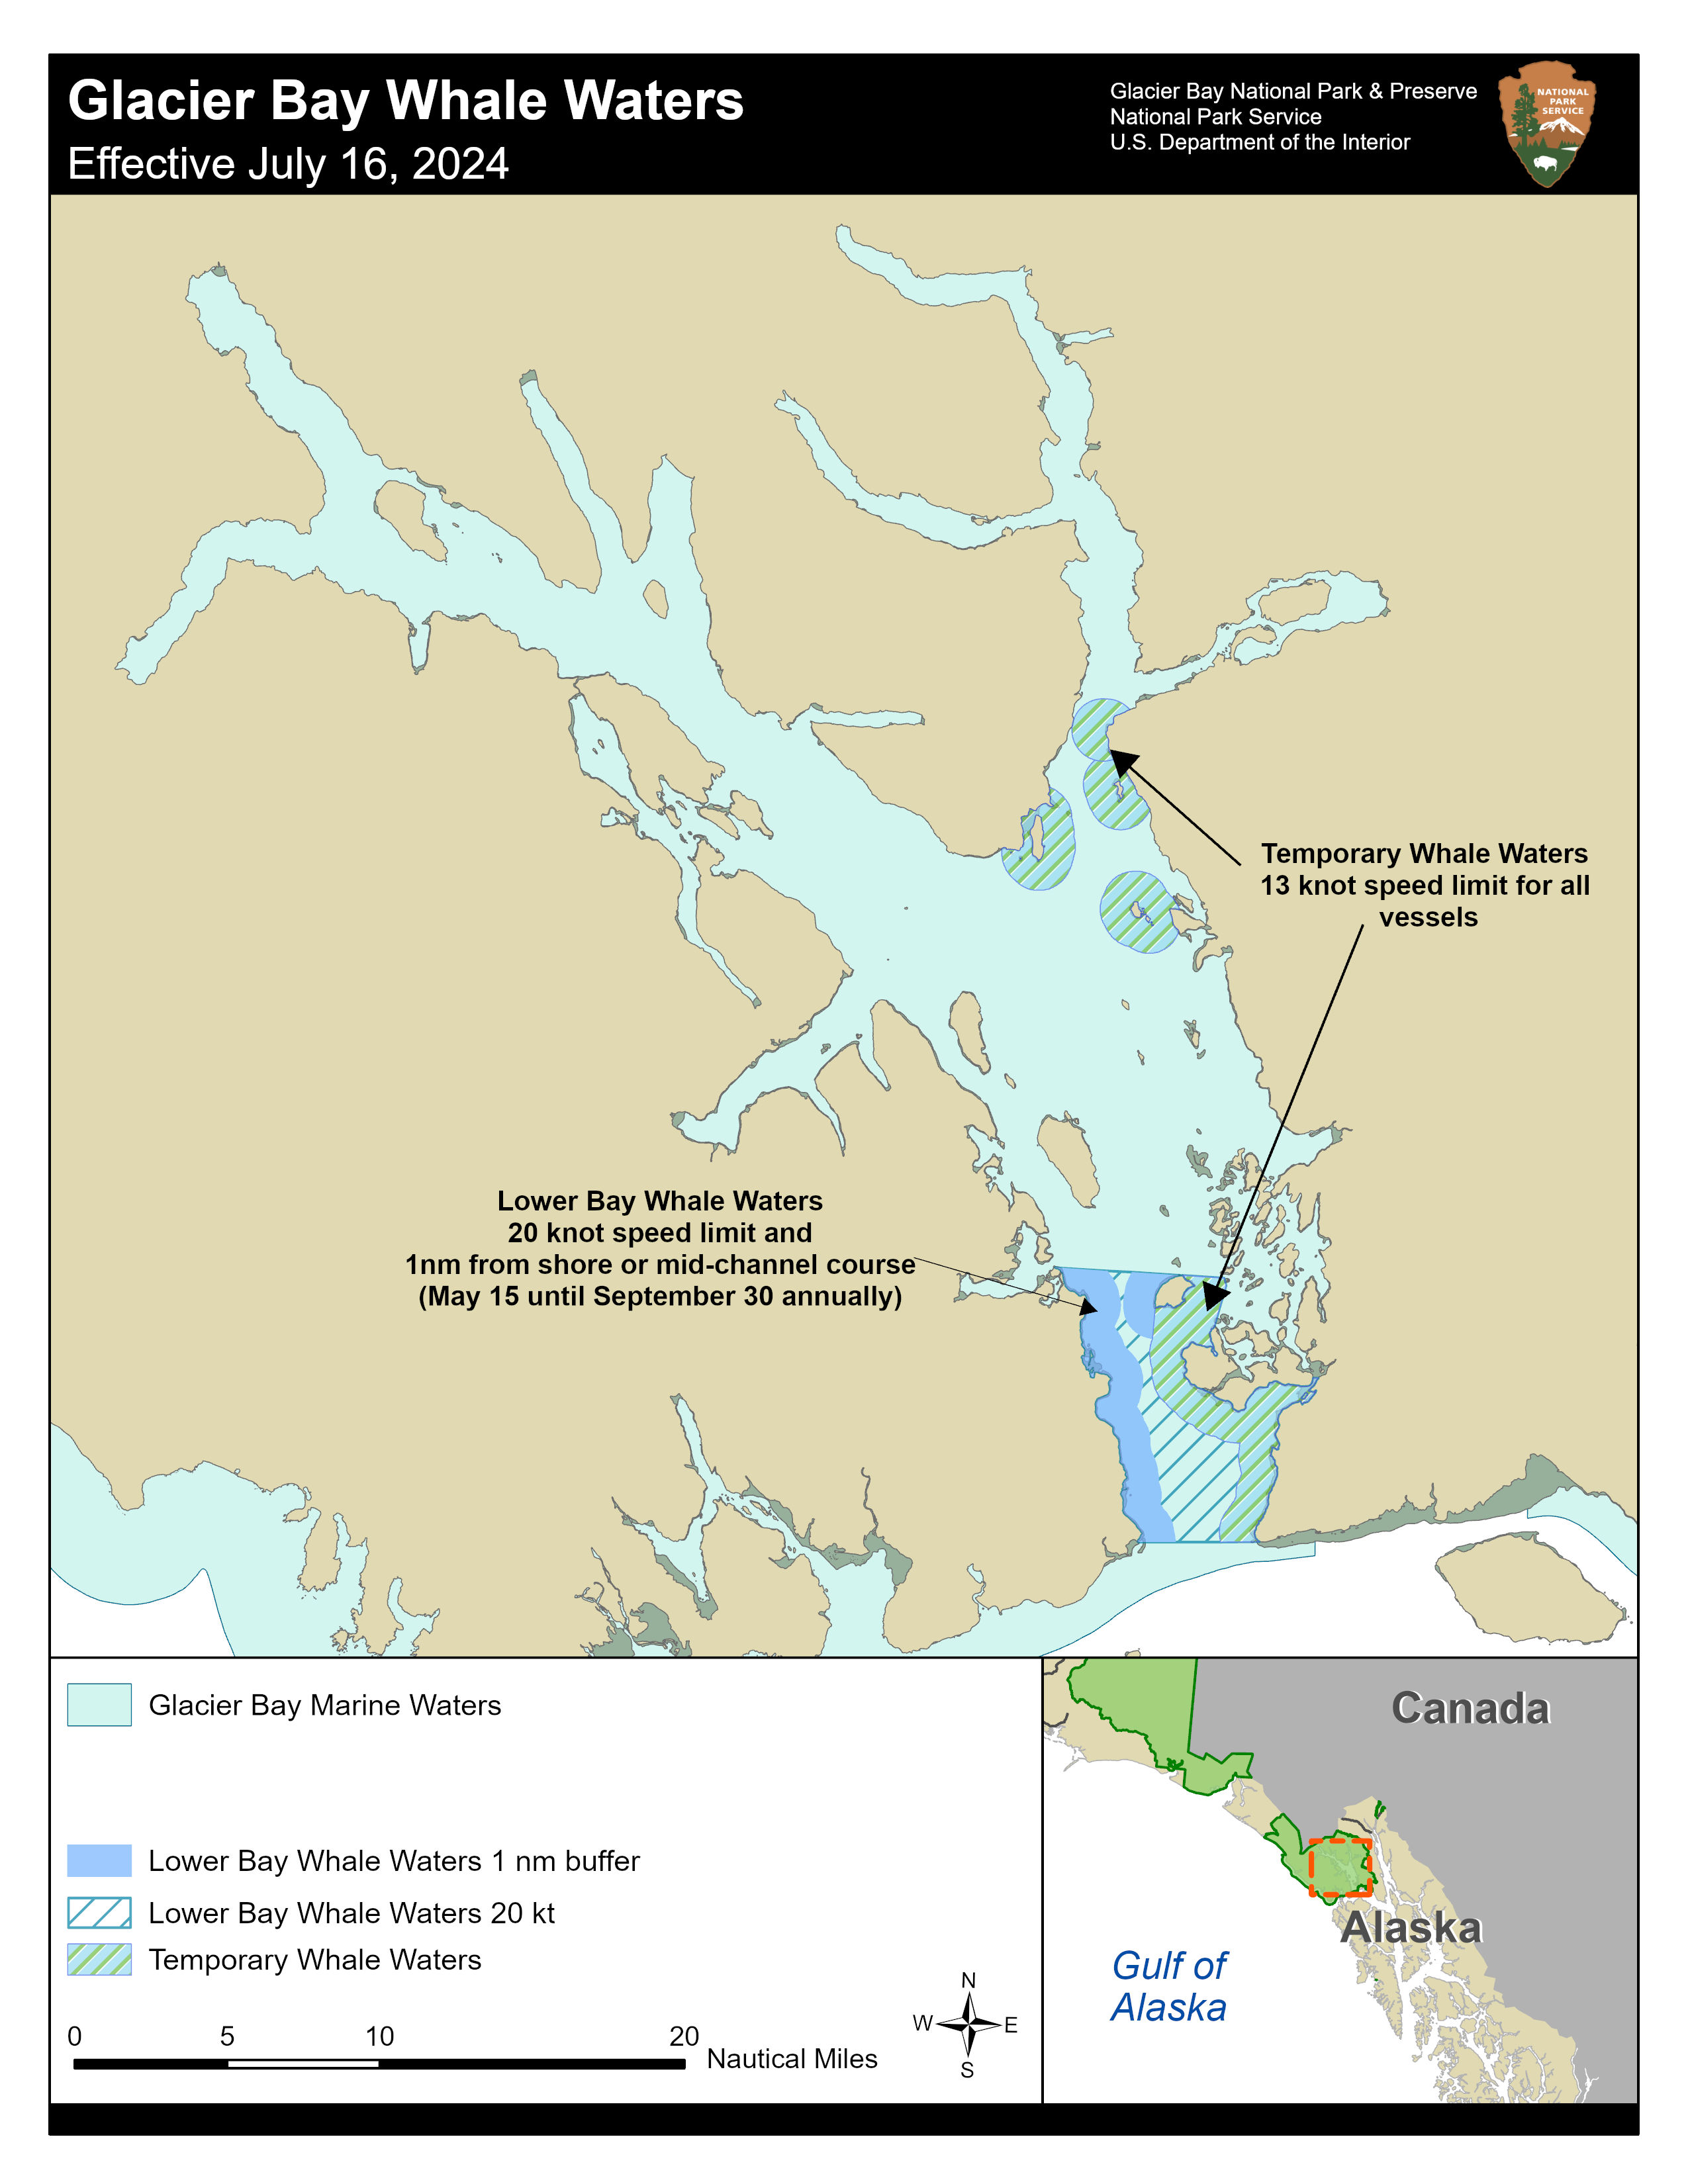 Map of affected whale waters areas in glacier bay where speed limits have been implemented to protect whales. Contact the park for precise details of this map 907-697-2230